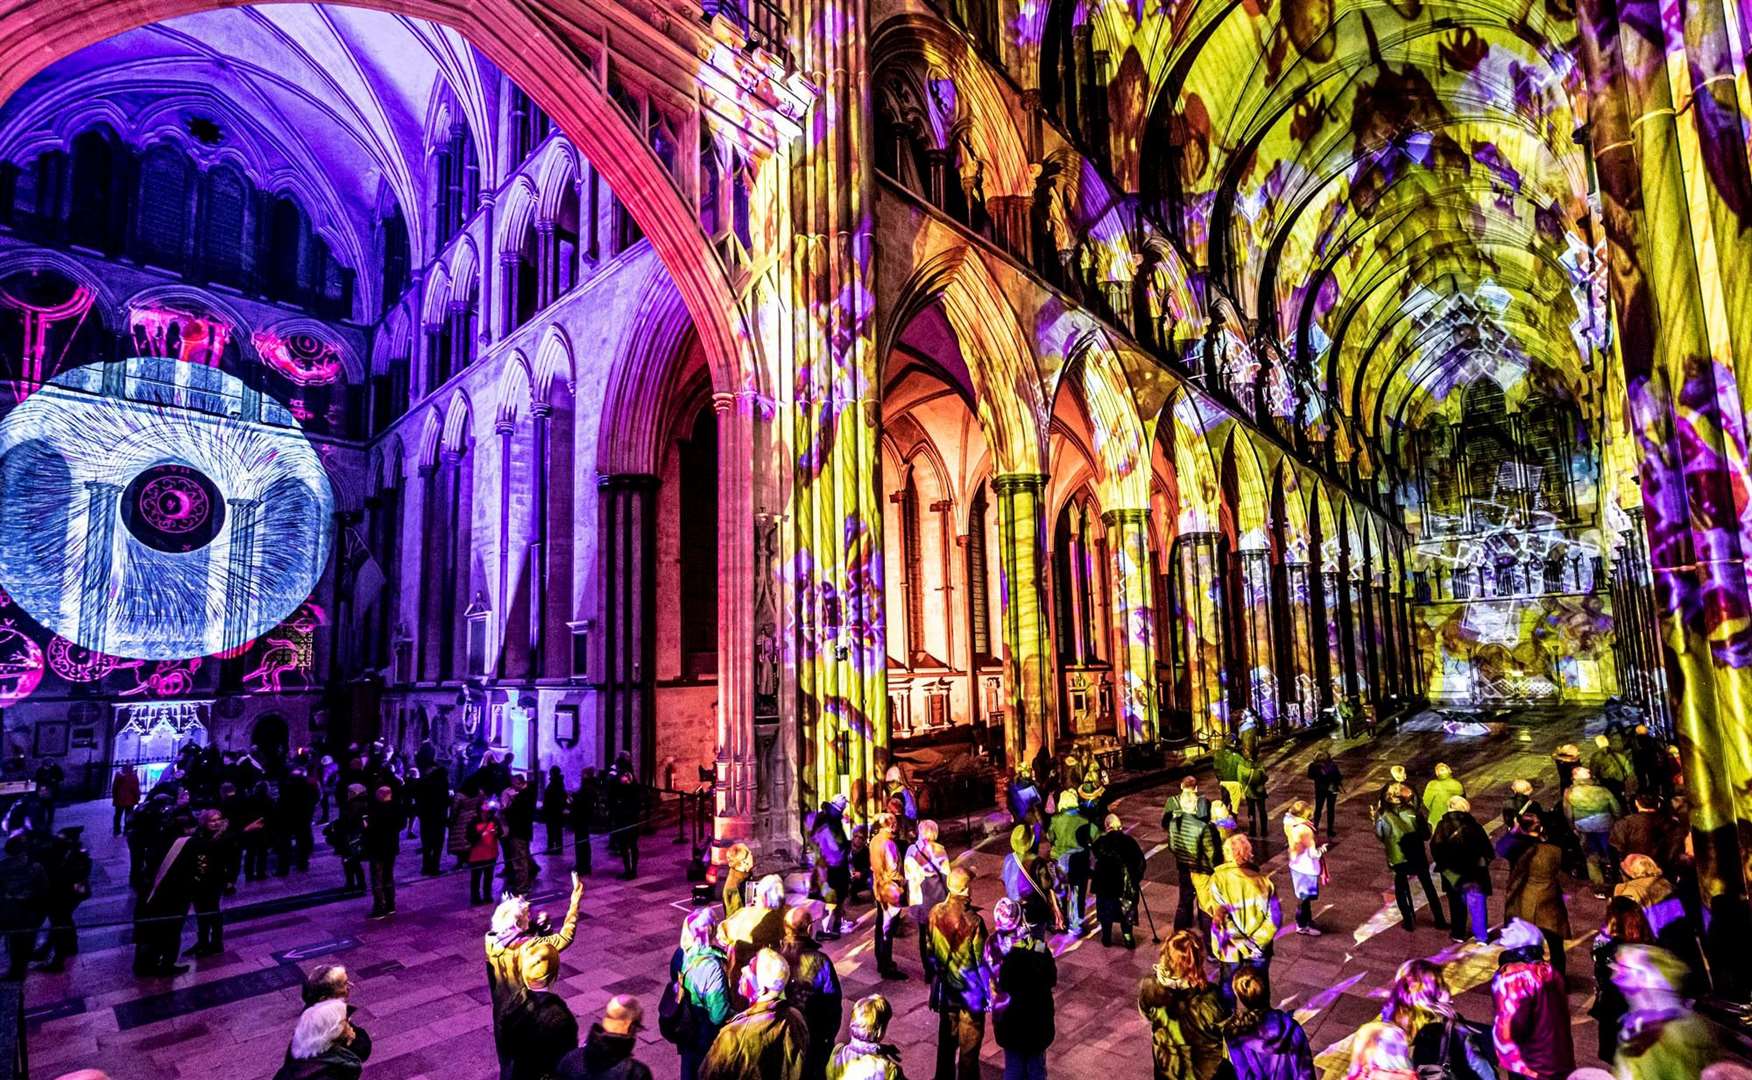 Renaissance, the new light show by Luxmuralis, is coming to Canterbury. Picture: Supplied by the Canterbury Festival